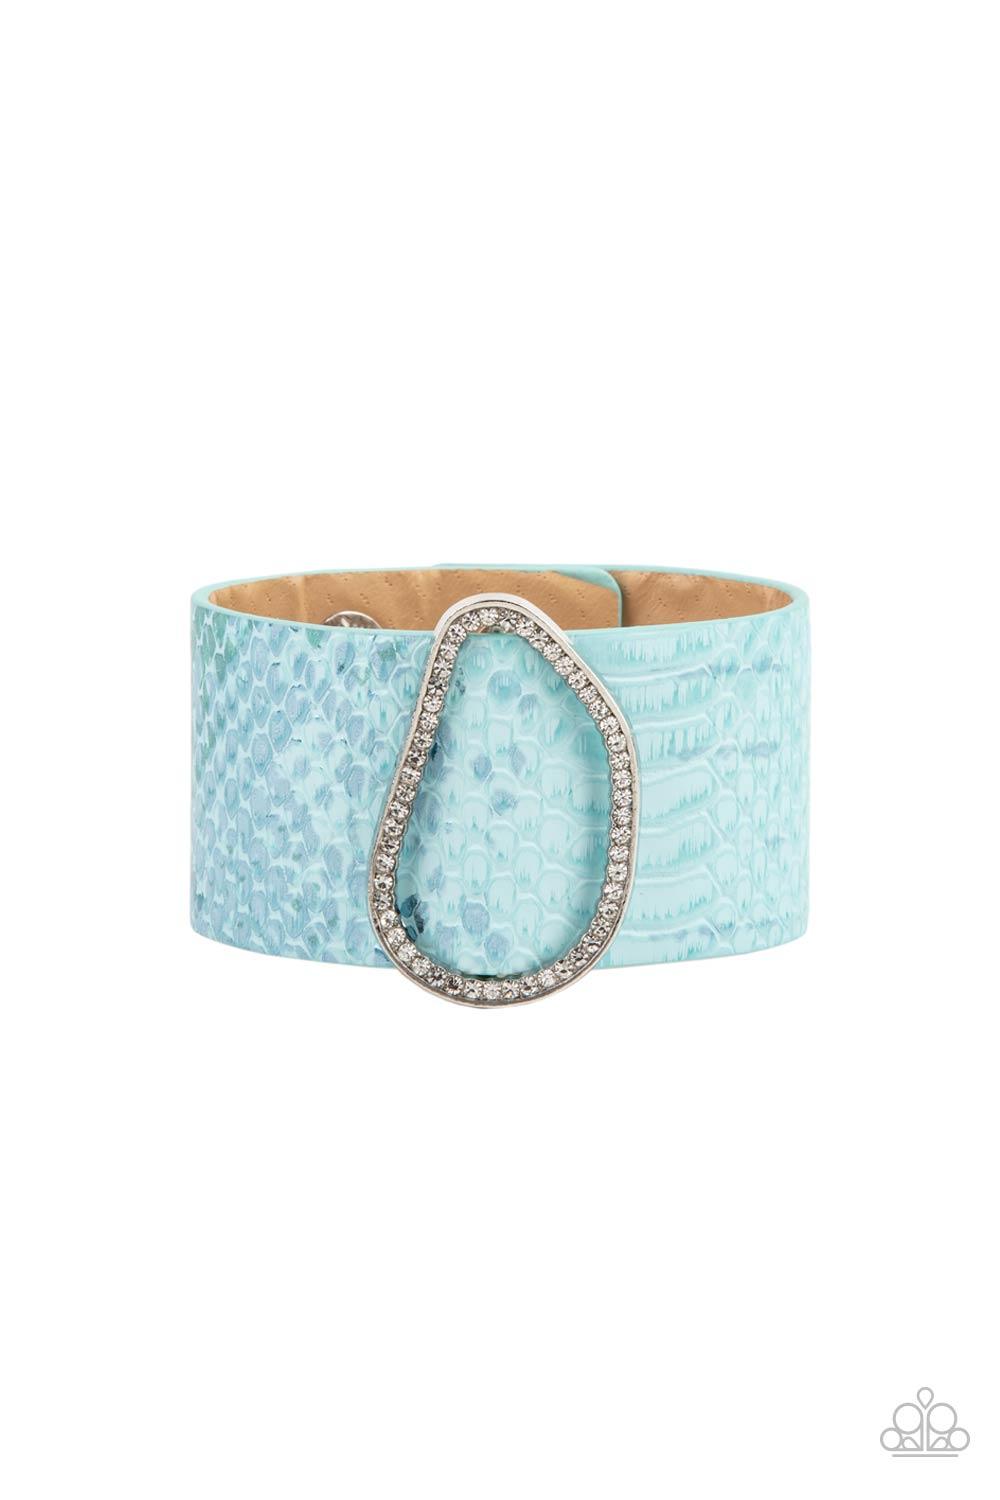 Paparazzi Accessories HISS-tory In The Making - Blue Encrusted with glassy white rhinestones, an asymmetrical silver fitting glides along a blue leather band adorned in a metallic python print for a wild look. Features an adjustable snap closure. Sold as